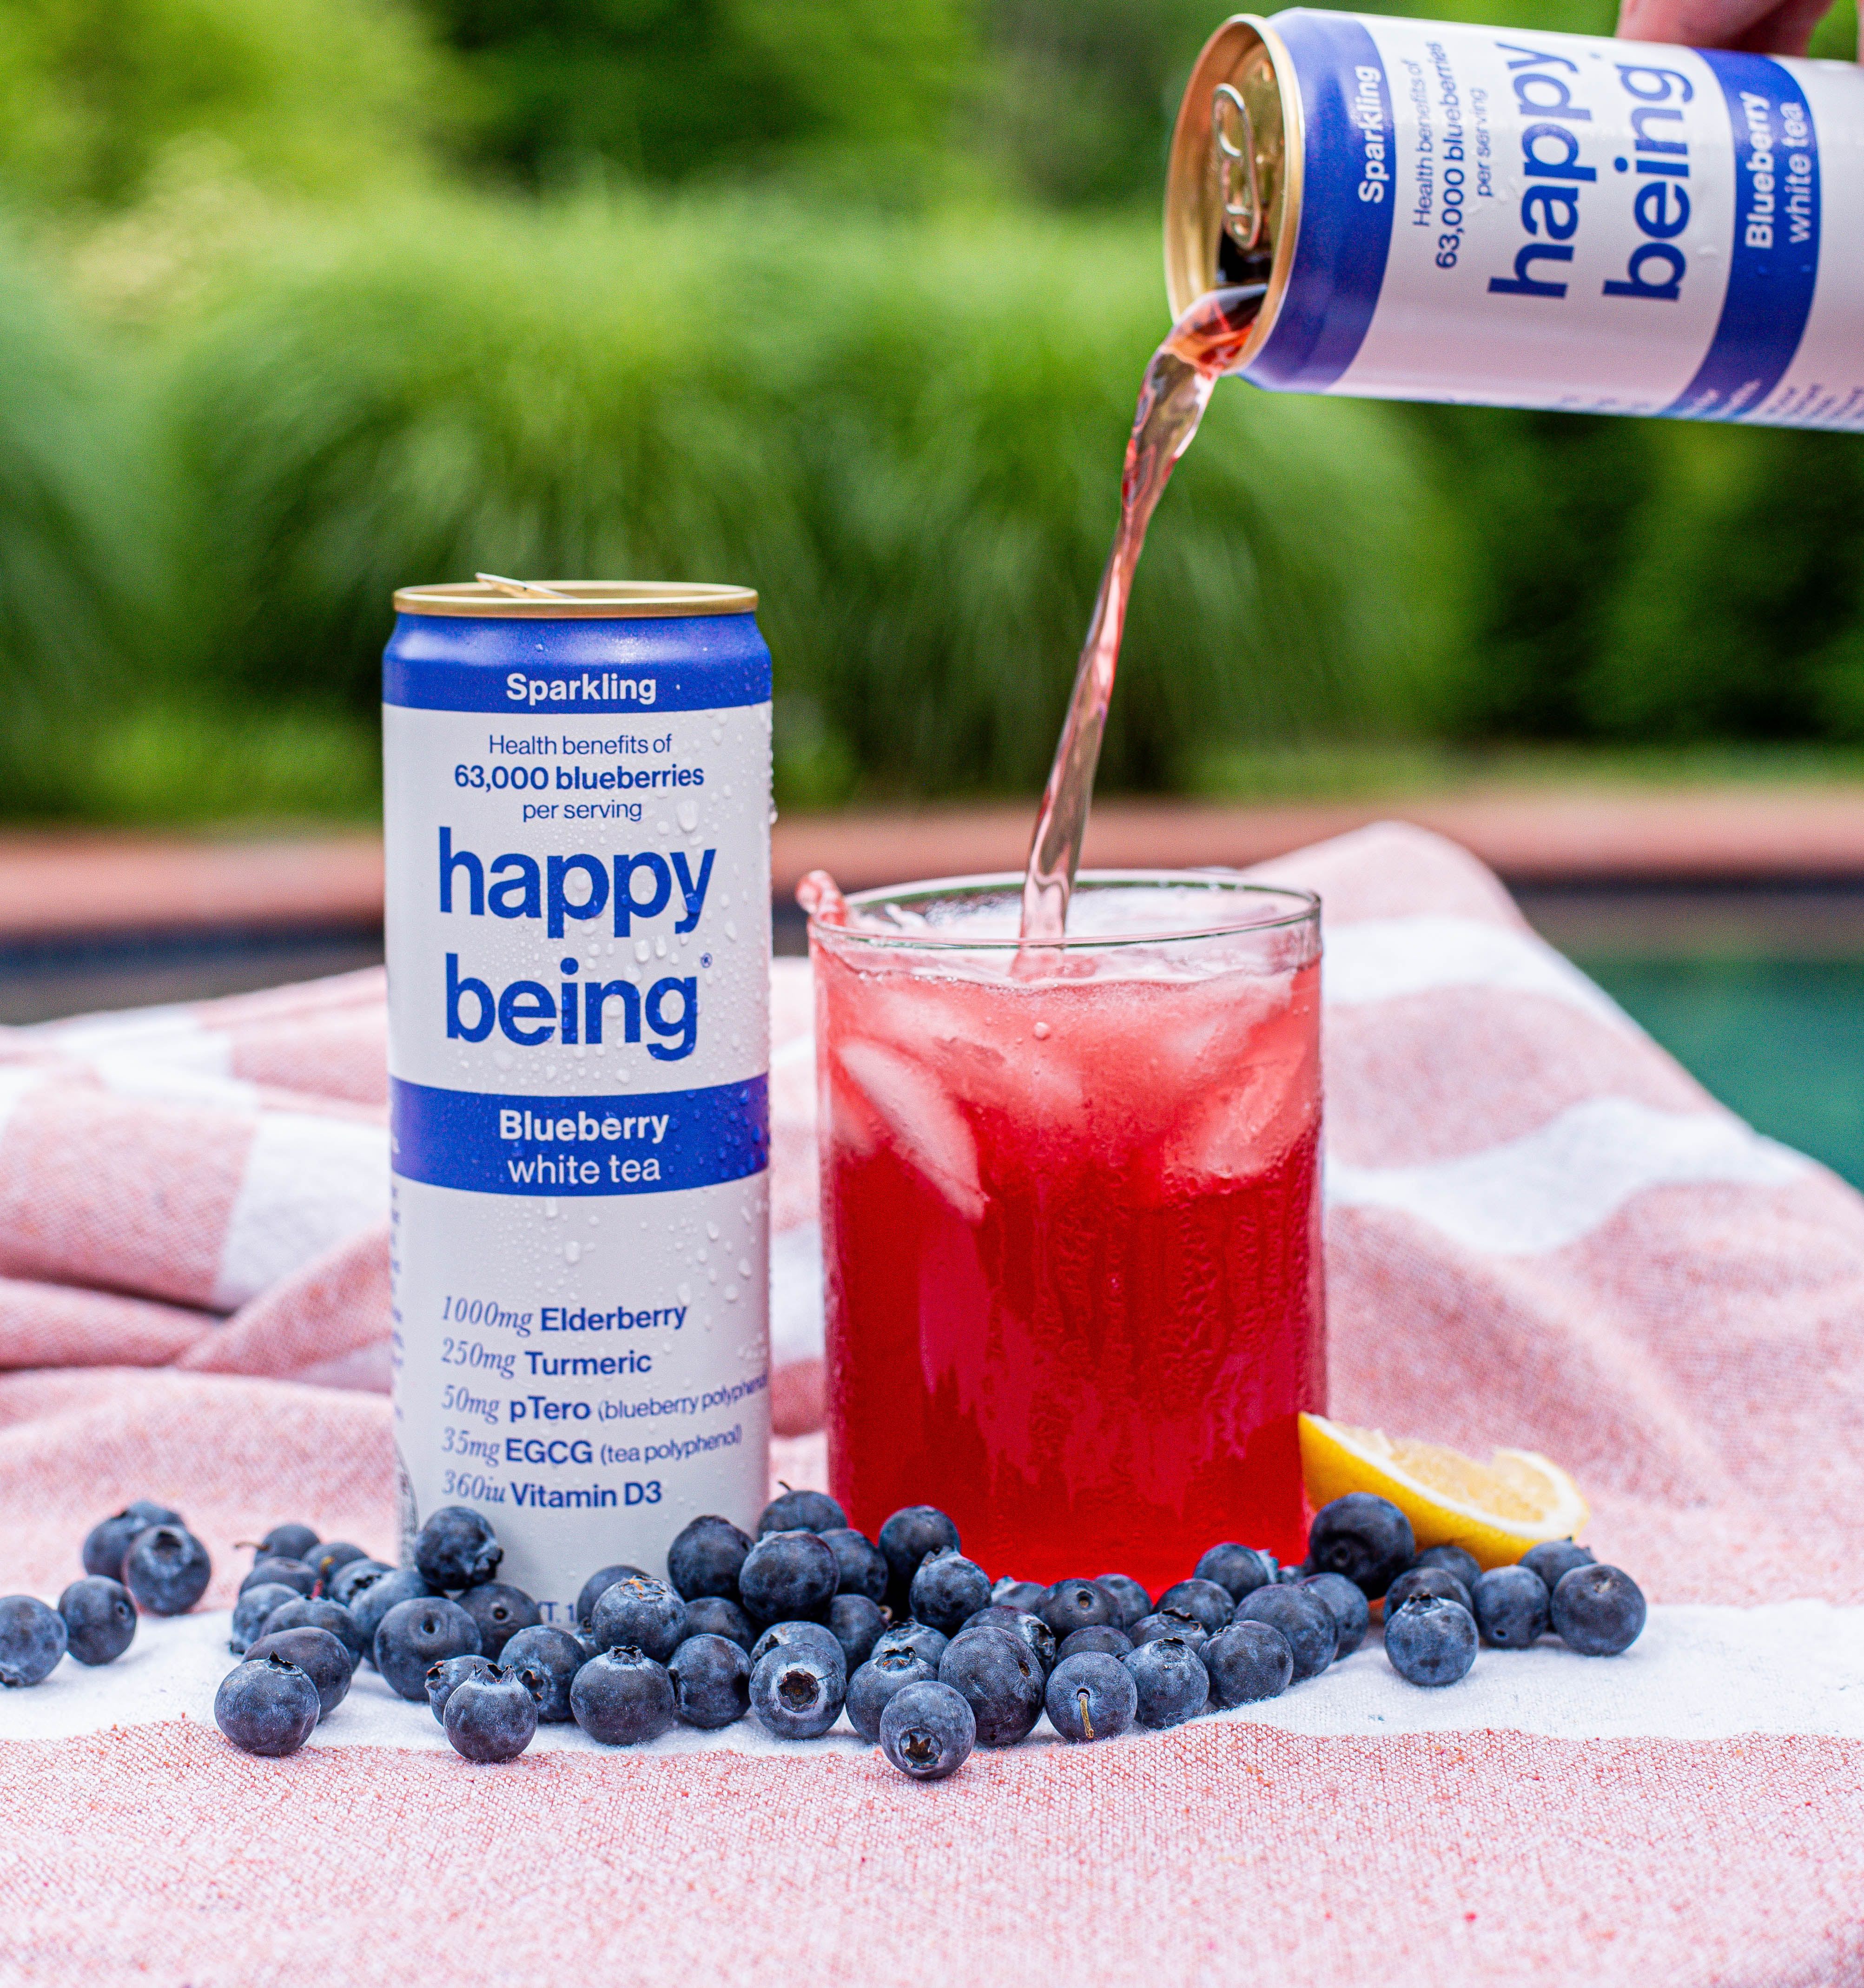 A can of sparkling blueberry white tea poured into a glass, surrounded by fresh blueberries and a lemon slice.